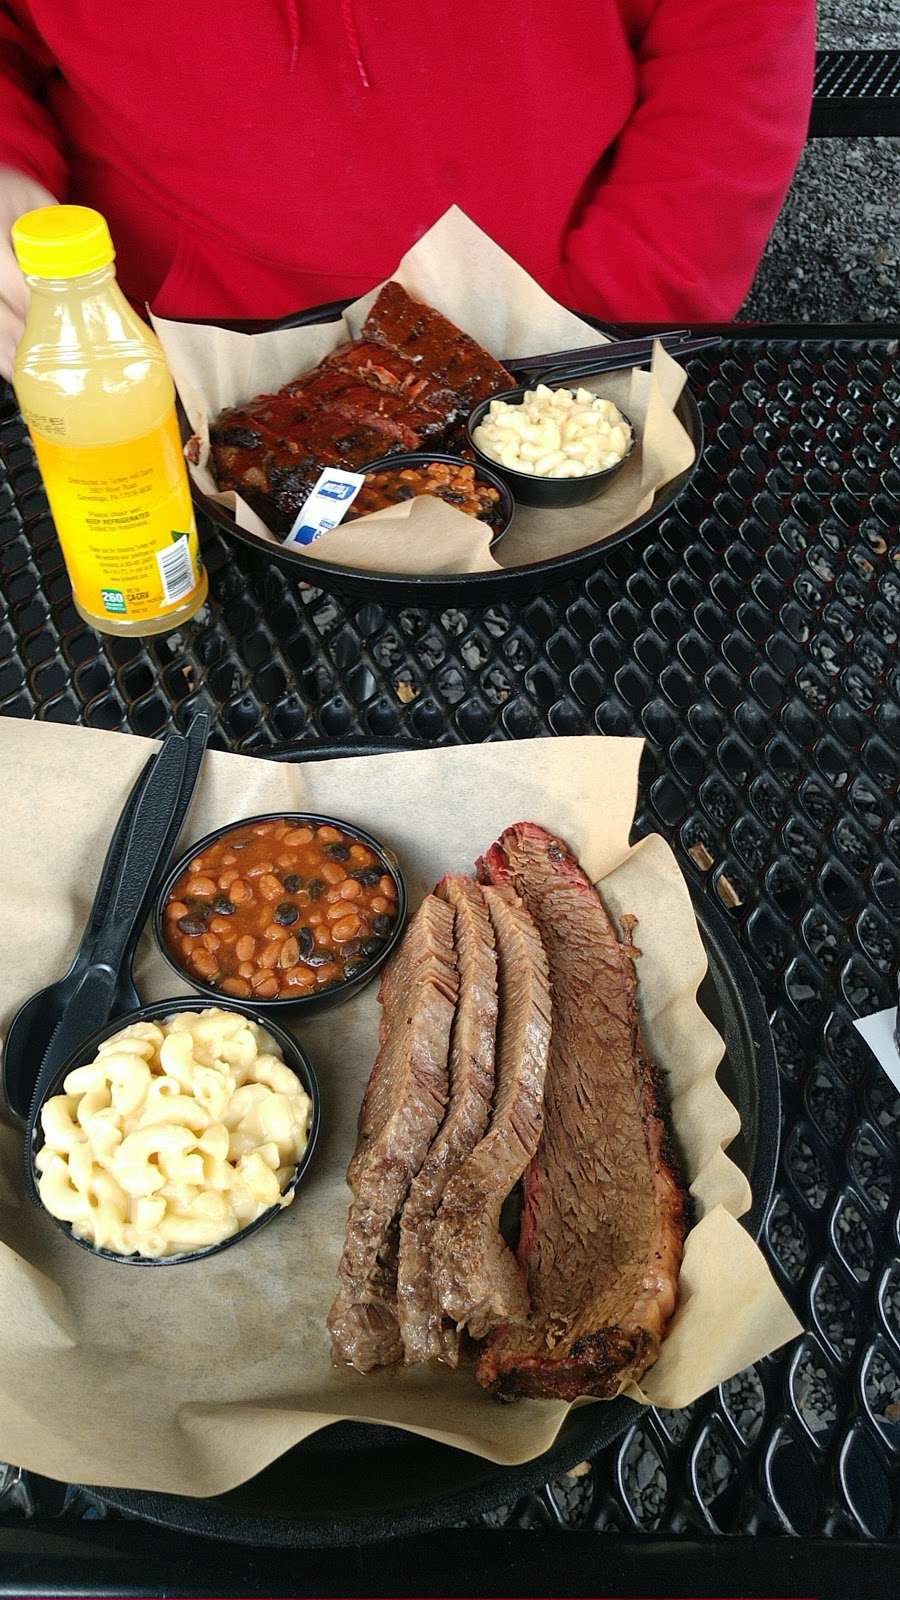 Jesses Barbecue & Local Market | 98 N County Line Rd, Souderton, PA 18964 | Phone: (215) 723-4600